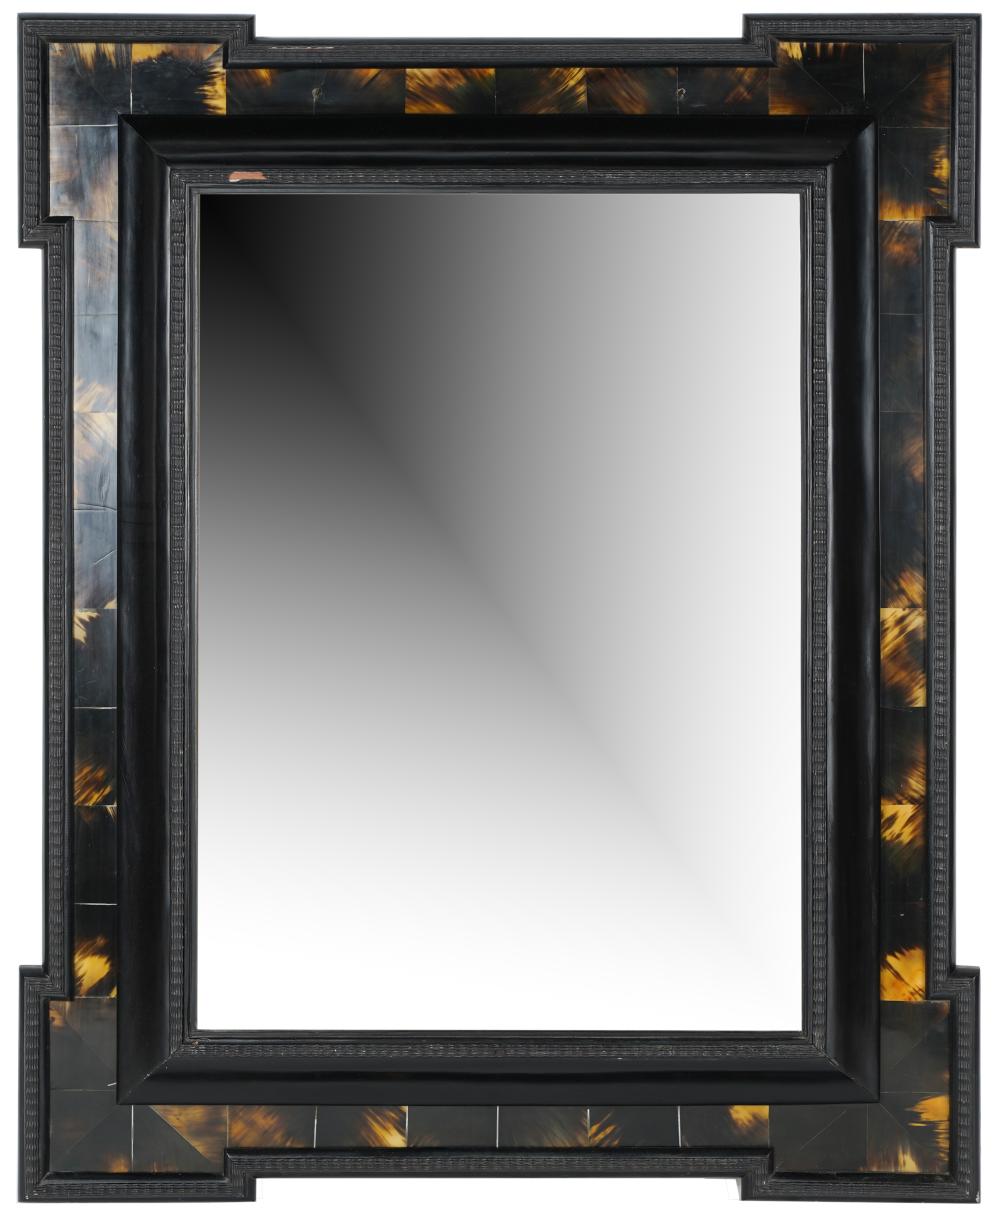 FLEMISH BAROQUE-STYLE WALL MIRRORwith